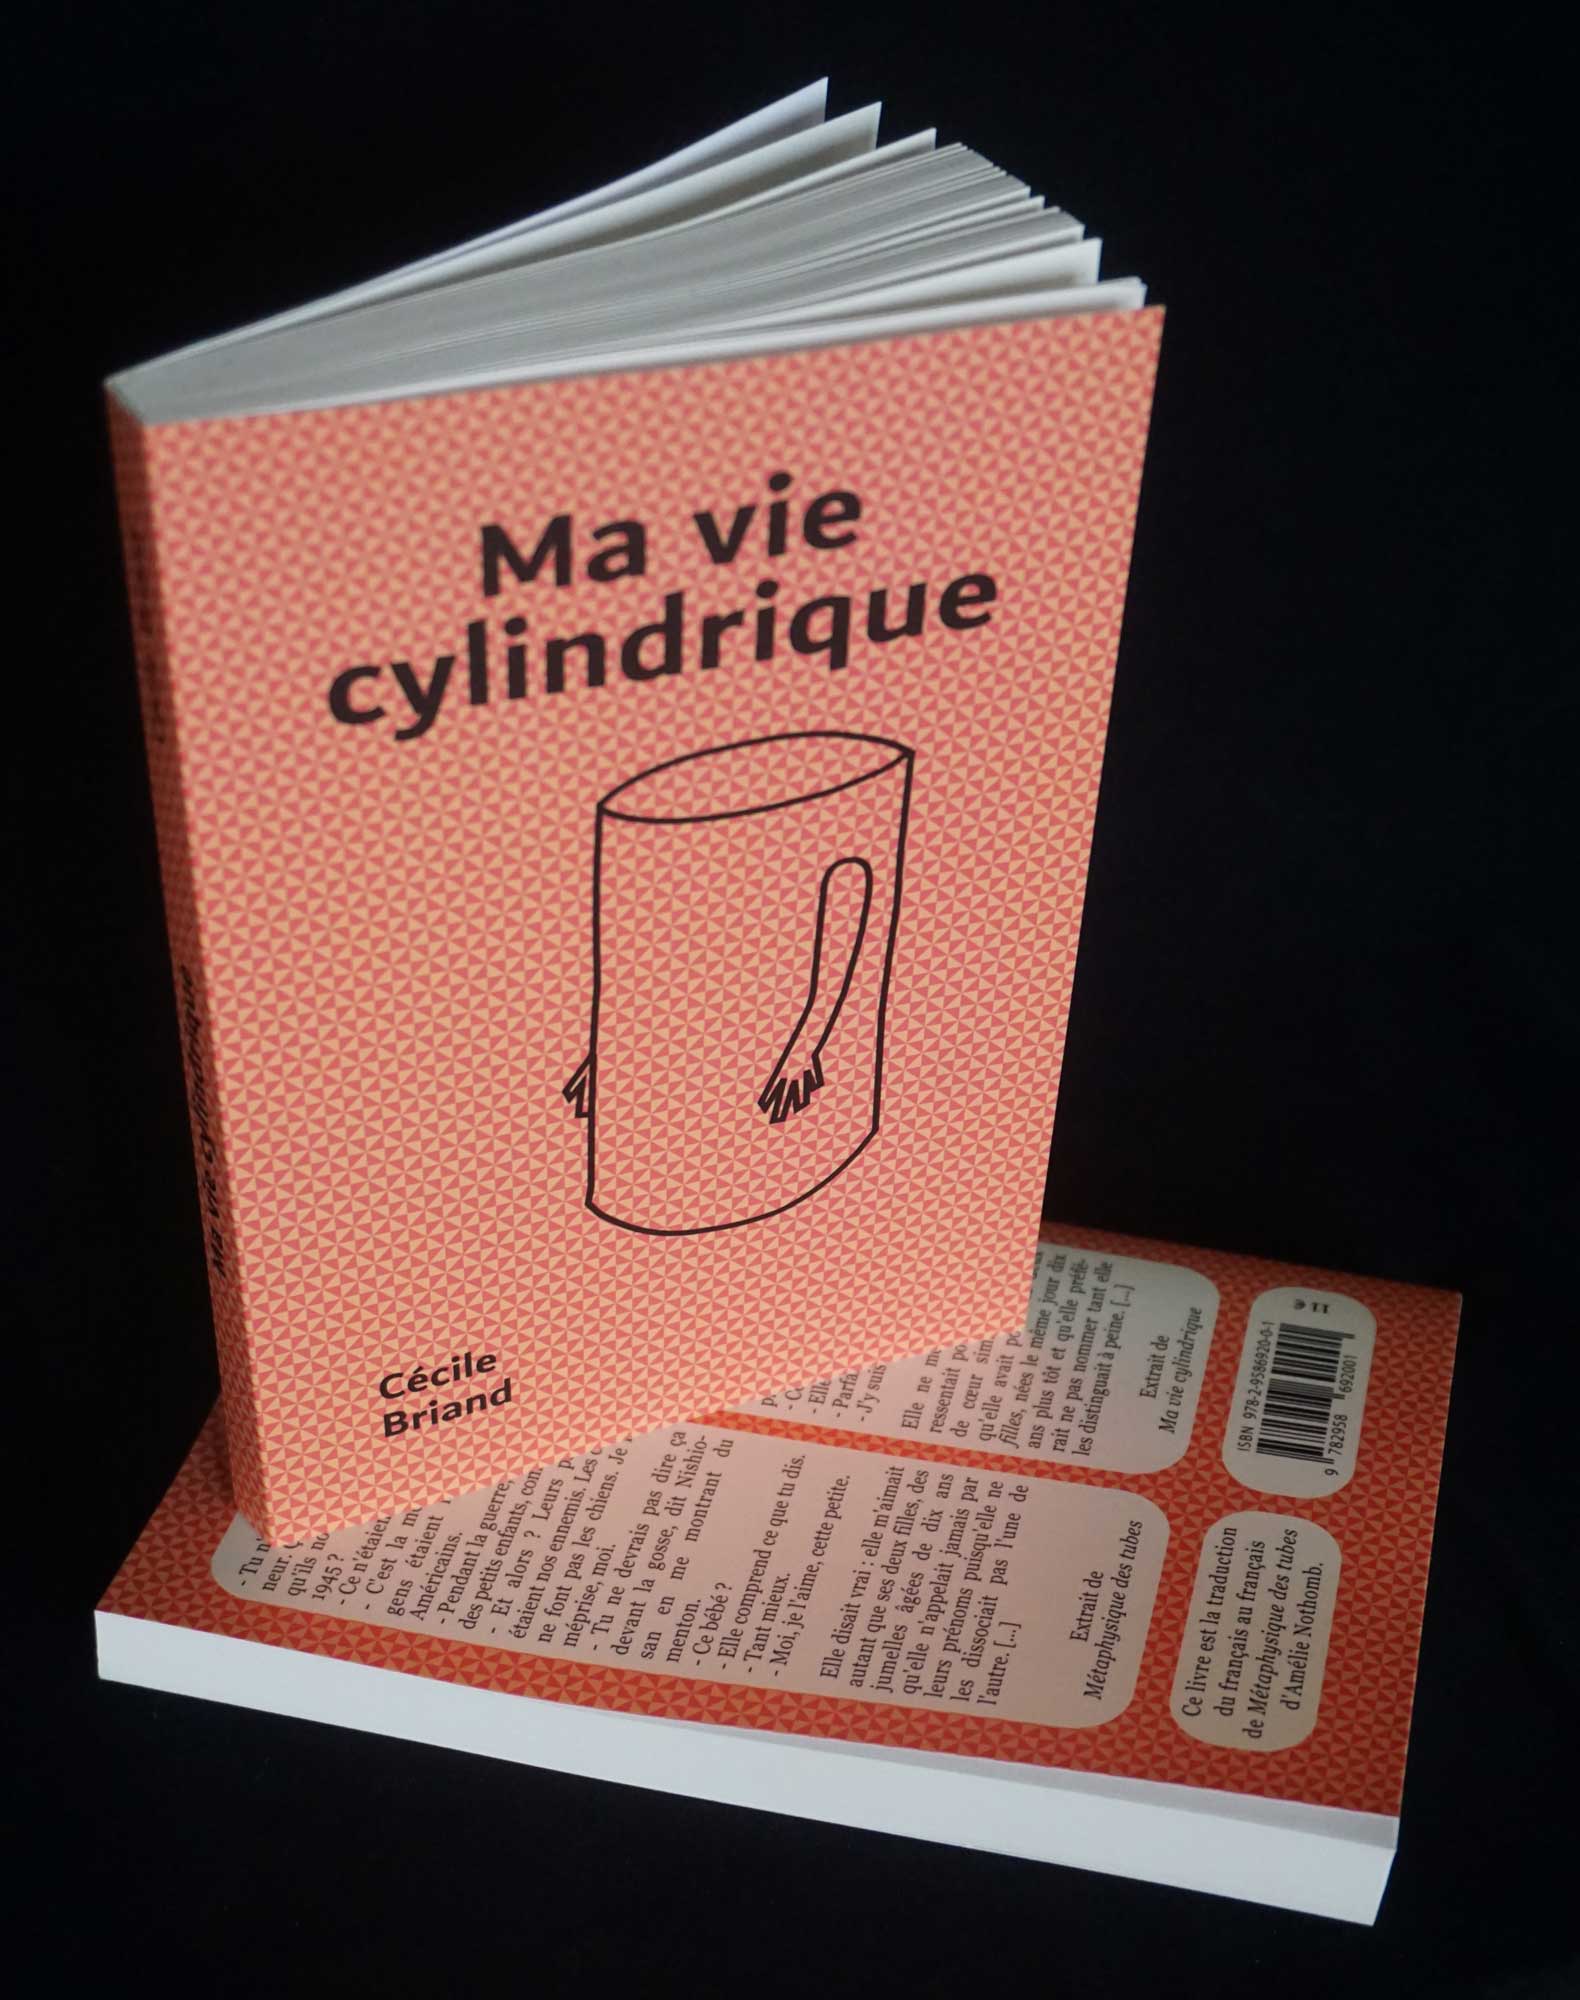 view 3 of the book ma vie cylindrique cécile briand